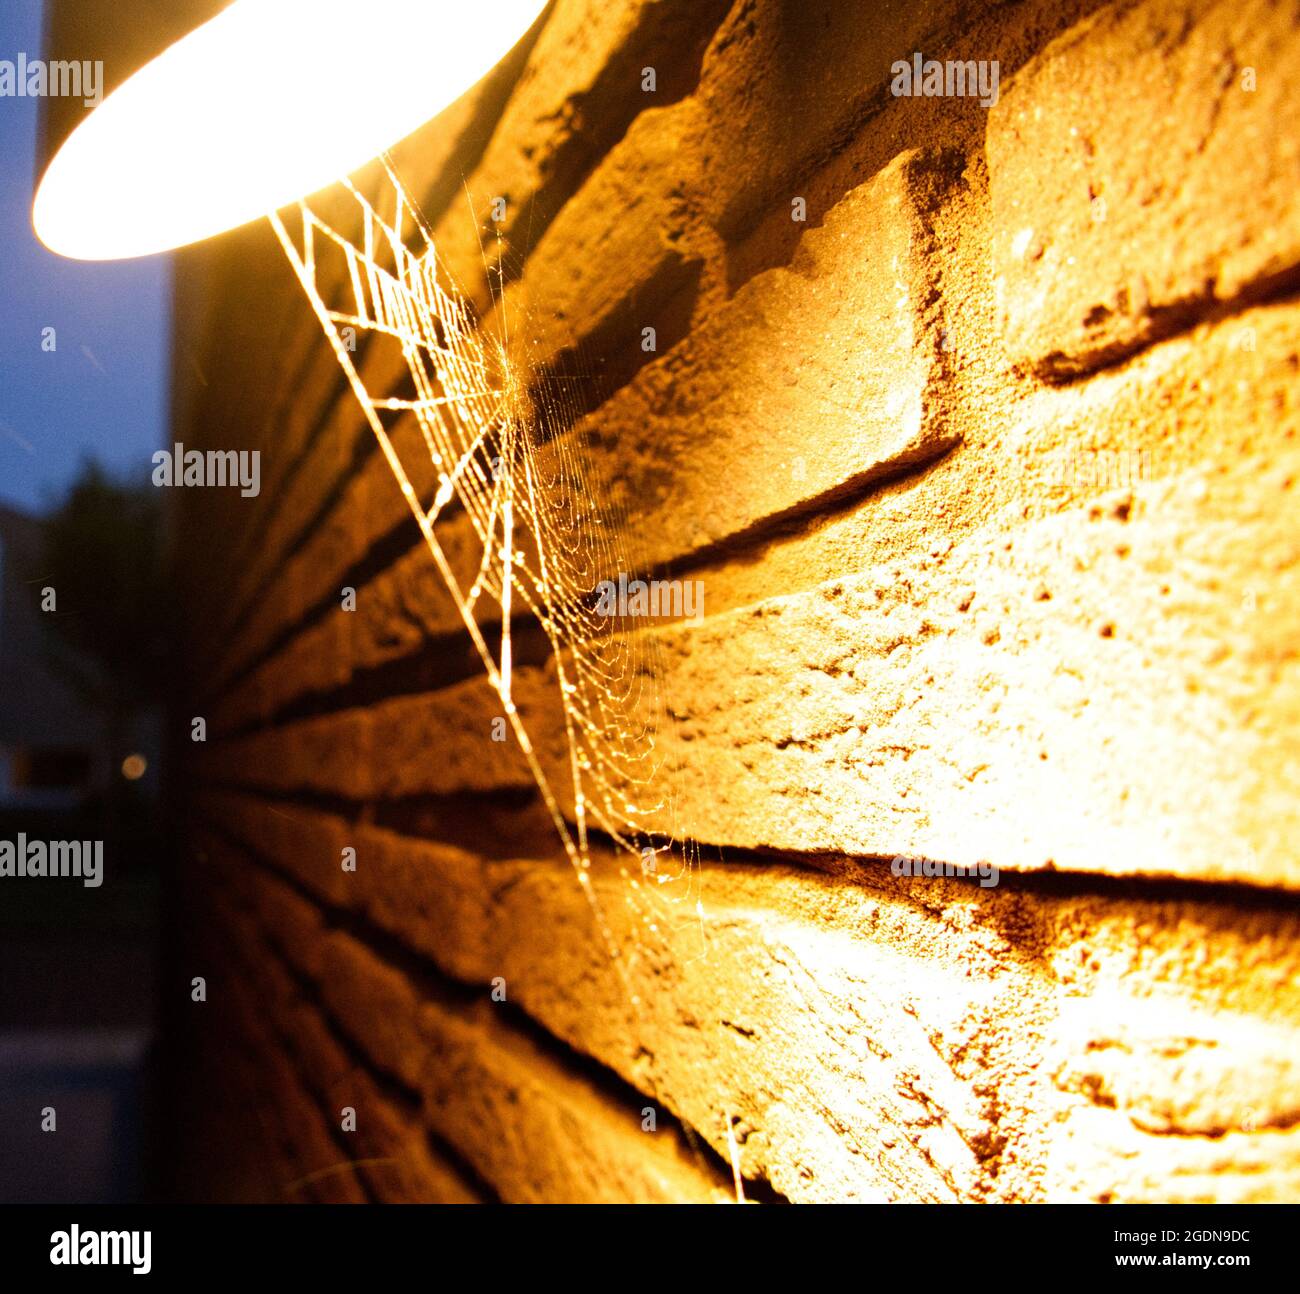 A spider's web between a lamp and a brick wall, illuminated by the lamp Stock Photo